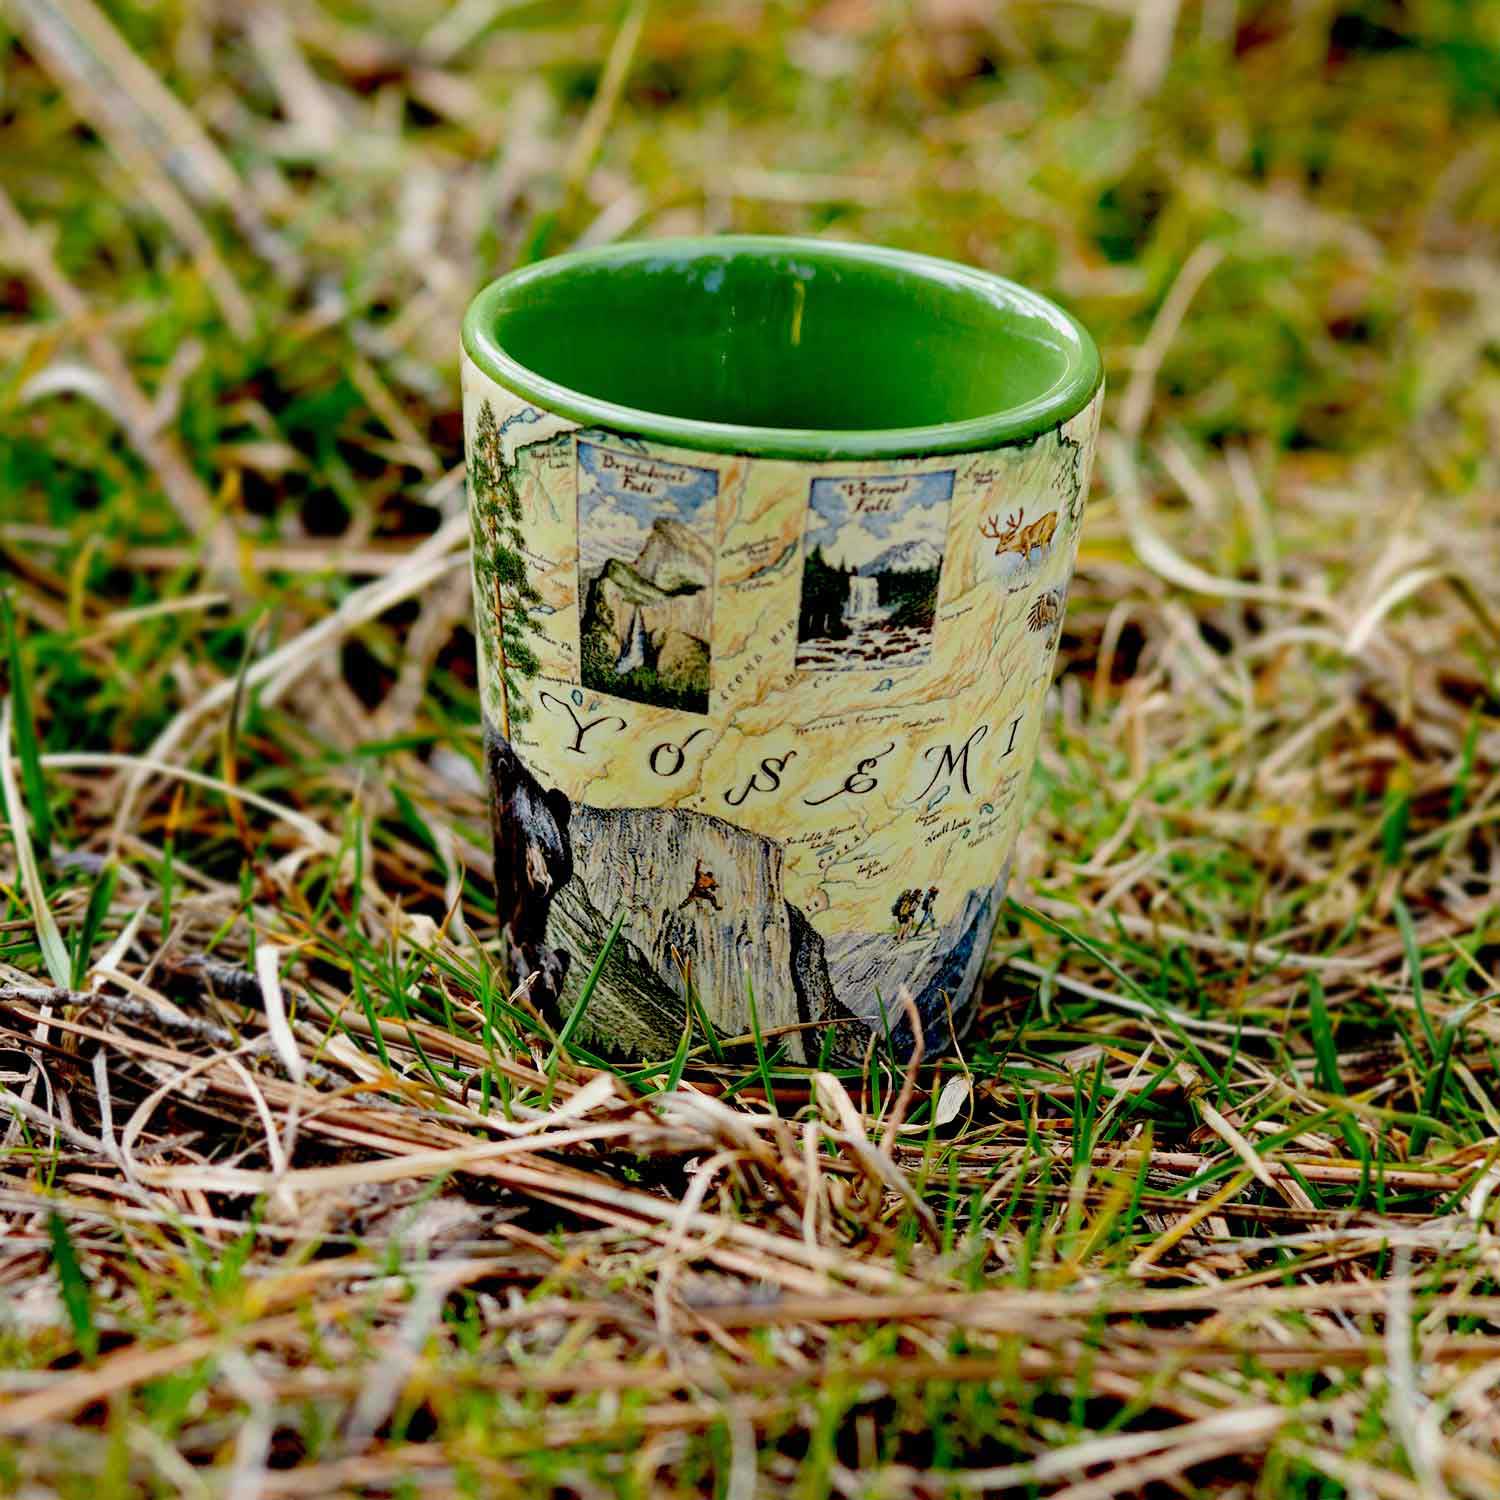 Yosemite National Park Map Ceramic shot glass by Xplorer Maps. The shot is sitting on the grass. Features illustrations of places such as Vernall Falls, El Capitan, and Half Dome. Flora and fauna include mule deer, Indian paintbrush, grey owl, coyote, and a black bear with her cubs. Other illustrations include John Muir, mountain climbing, hiking, and Ansel Adams. 